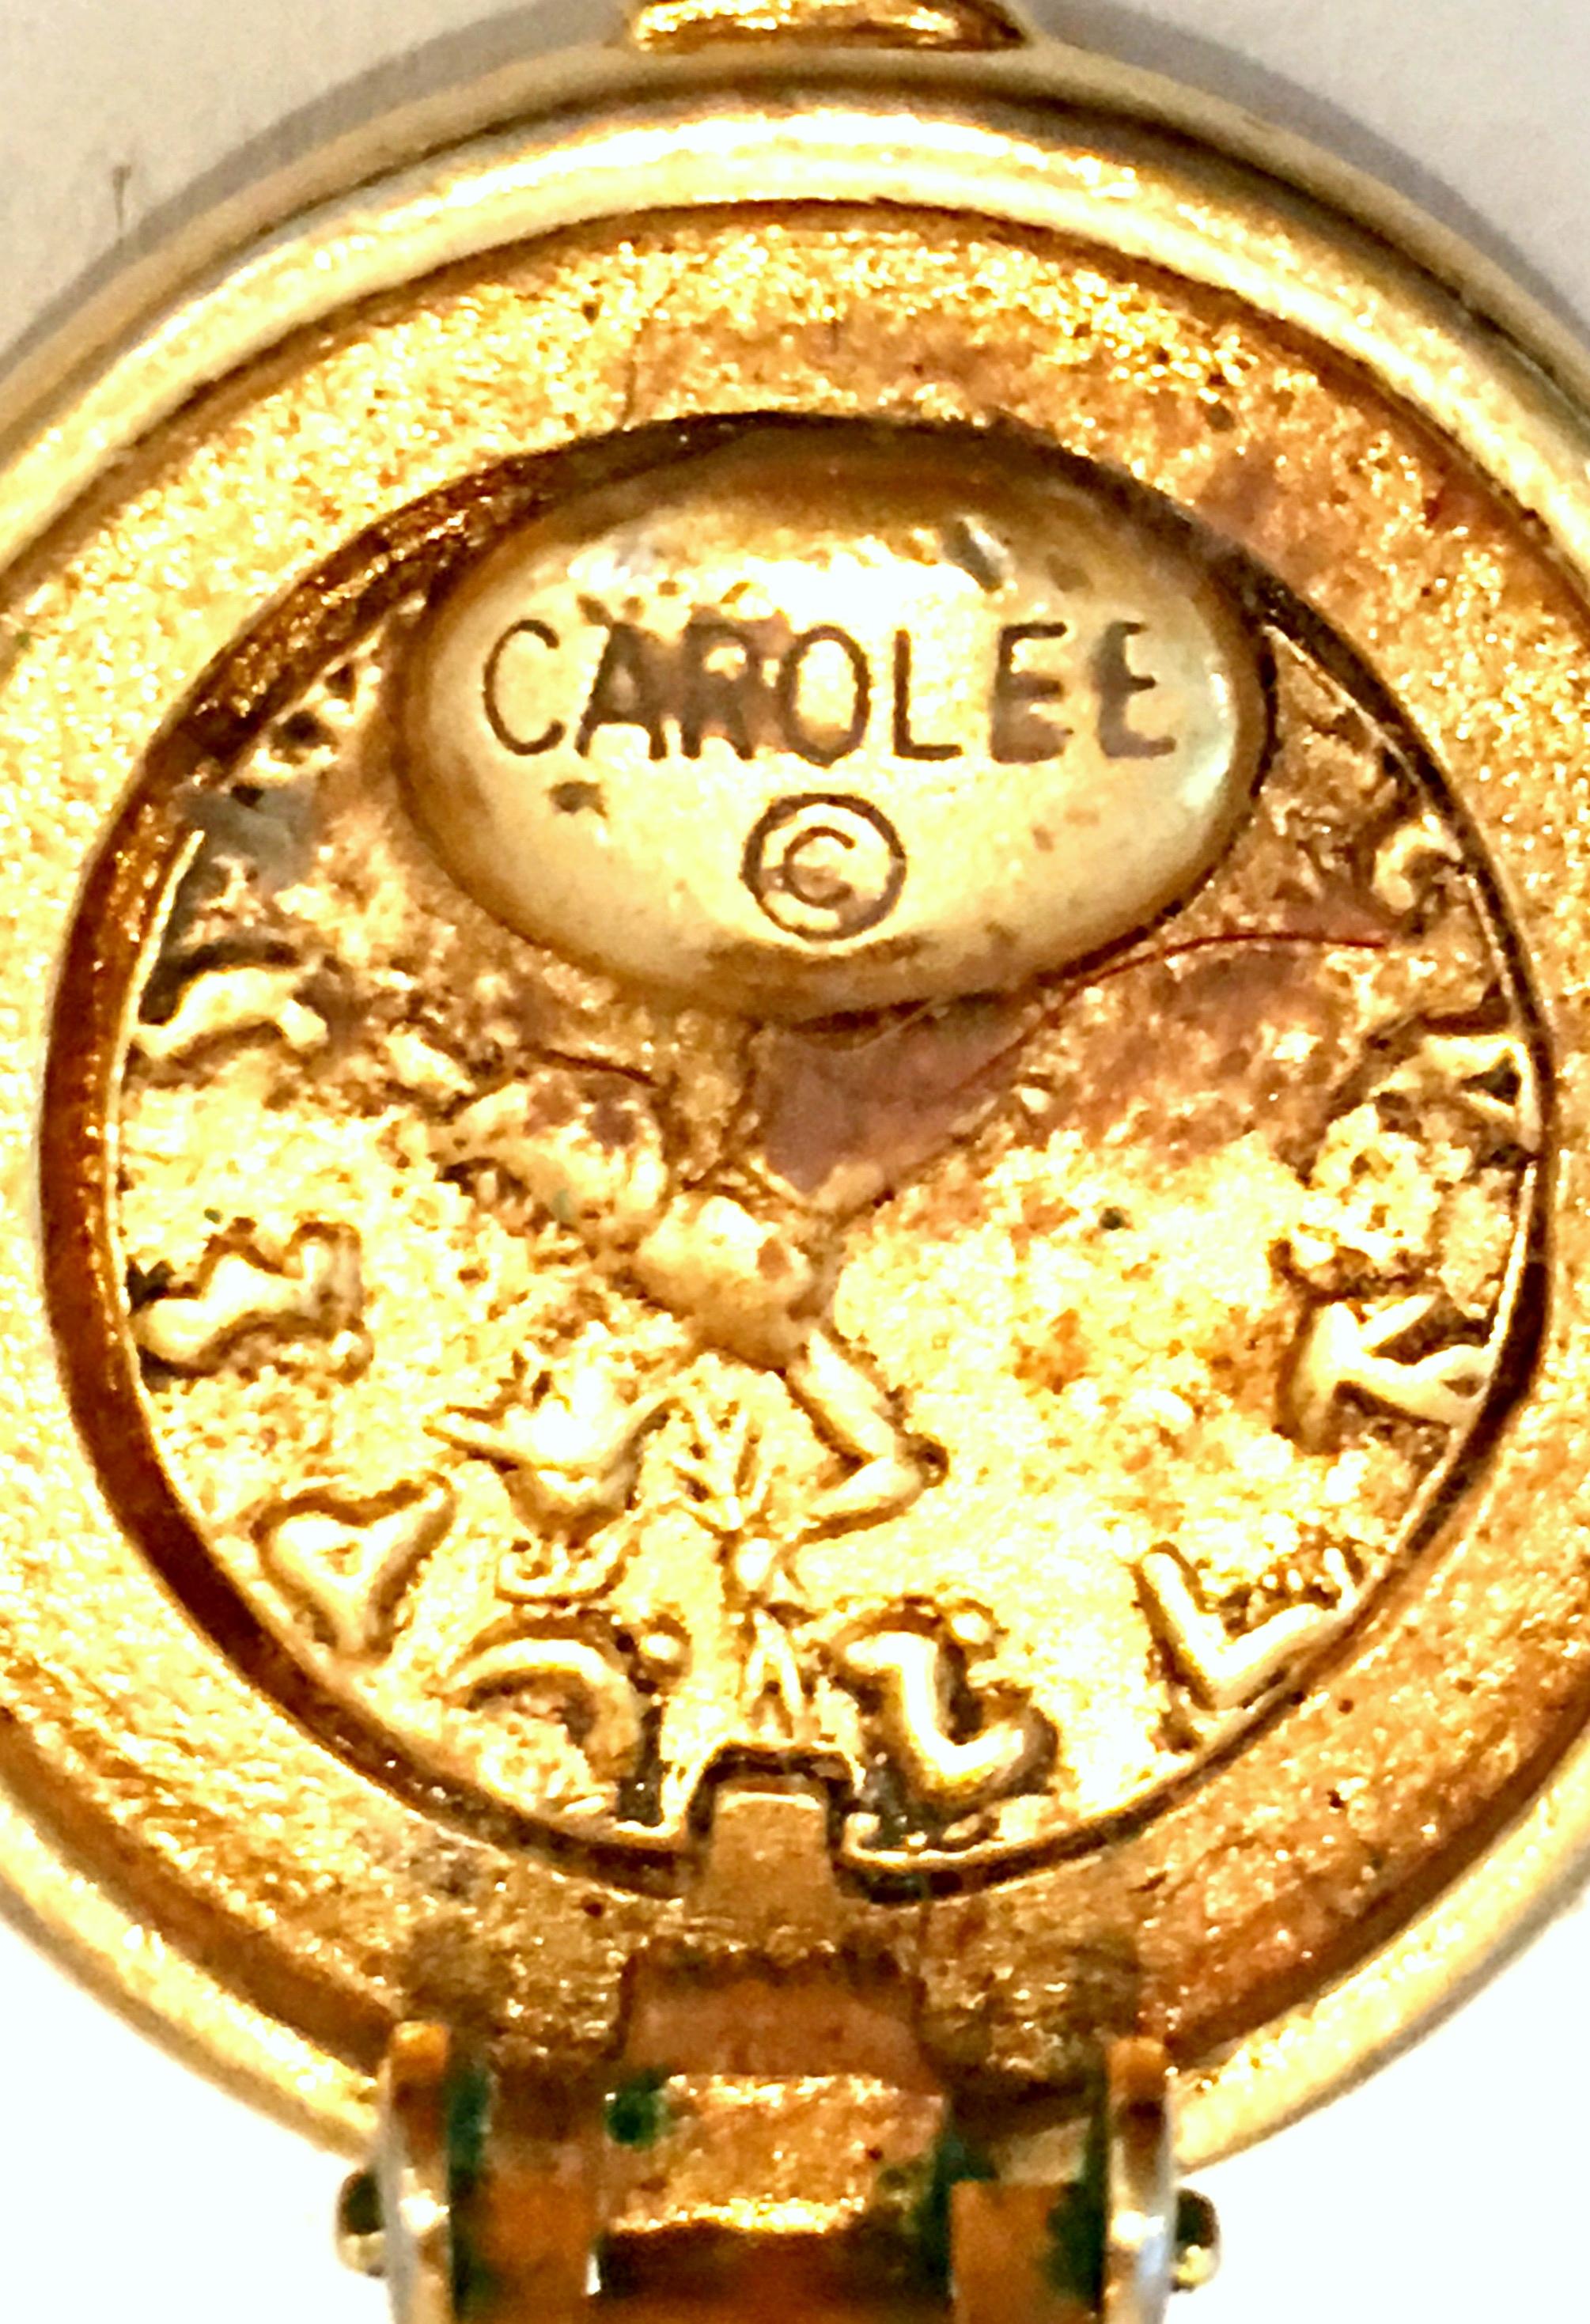 20th Century Pair Of Gold Plate Roman Coin Earrings By, Carolee In Good Condition For Sale In West Palm Beach, FL